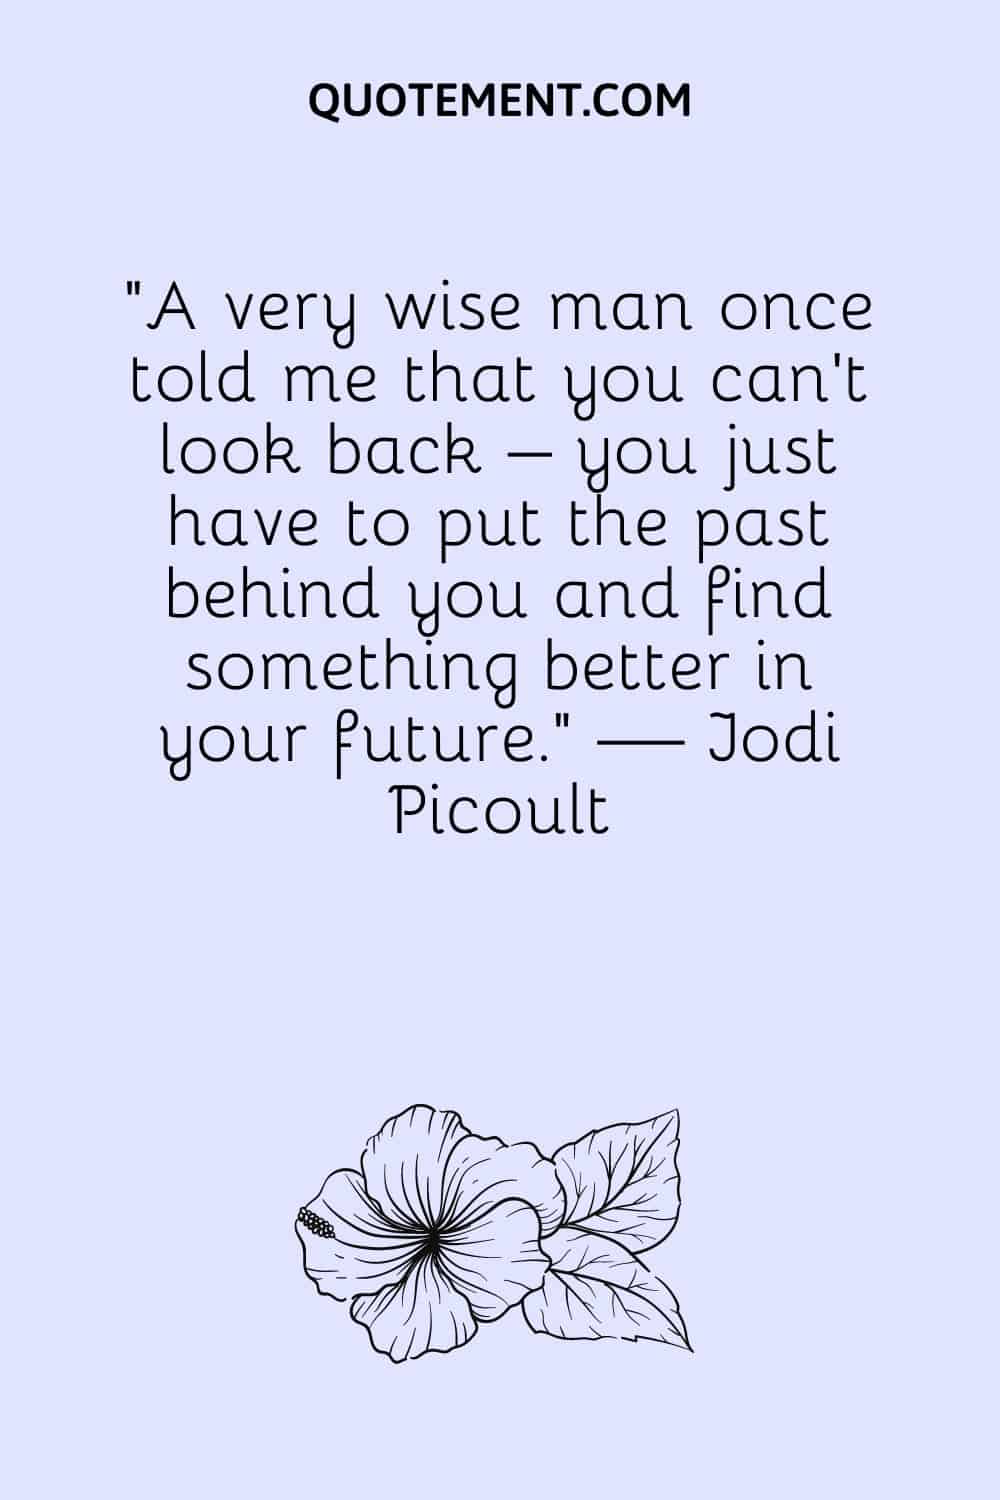 A very wise man once told me that you can’t look back